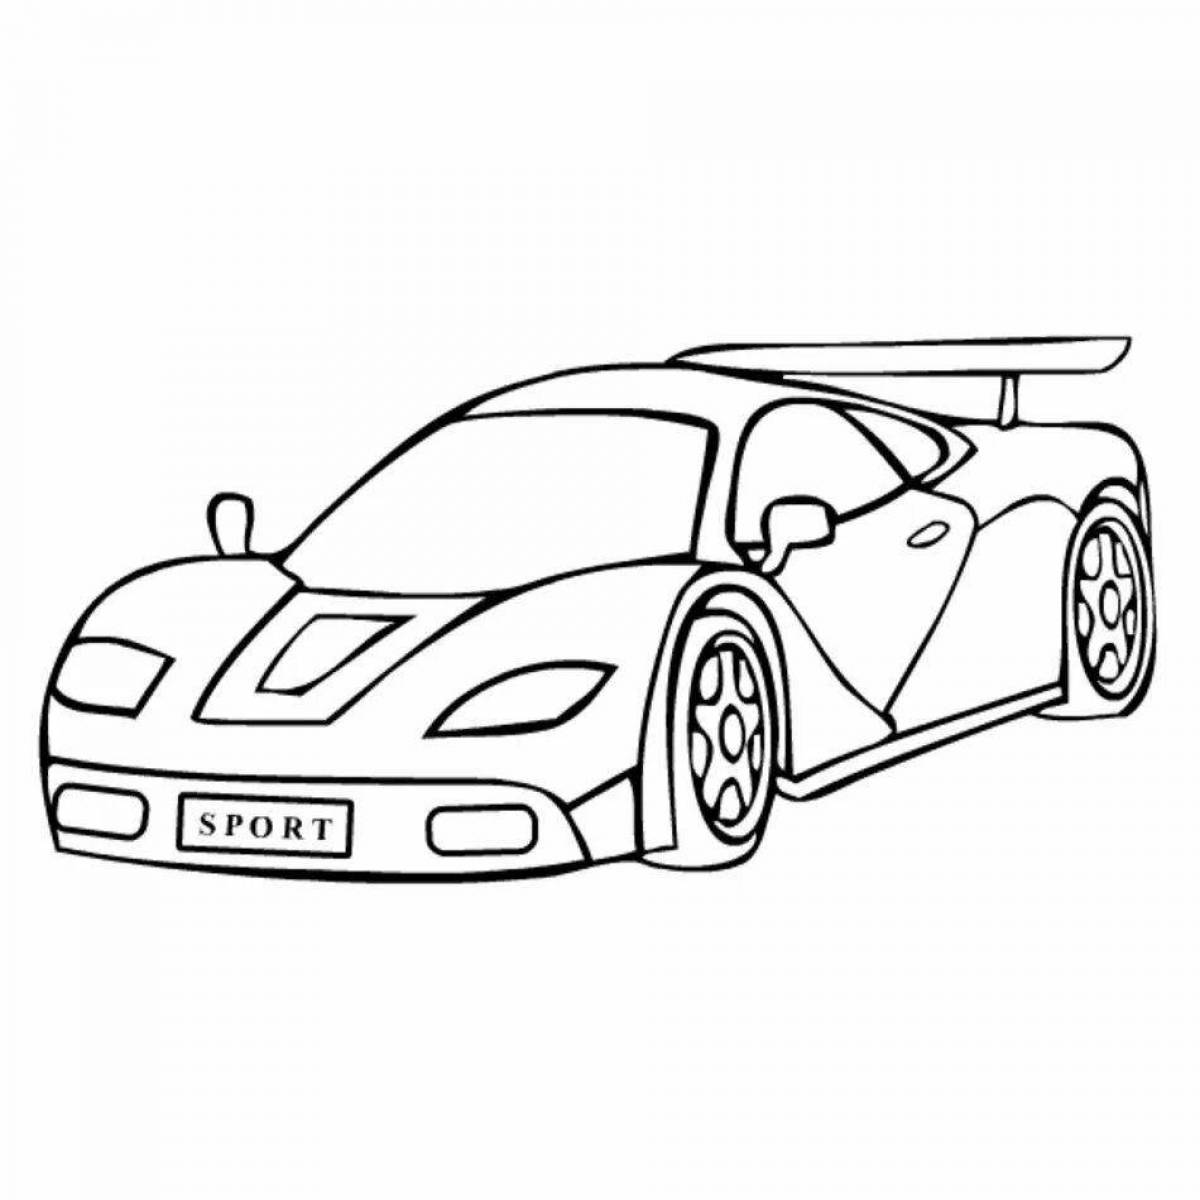 Coloring book glamor sports car for boys